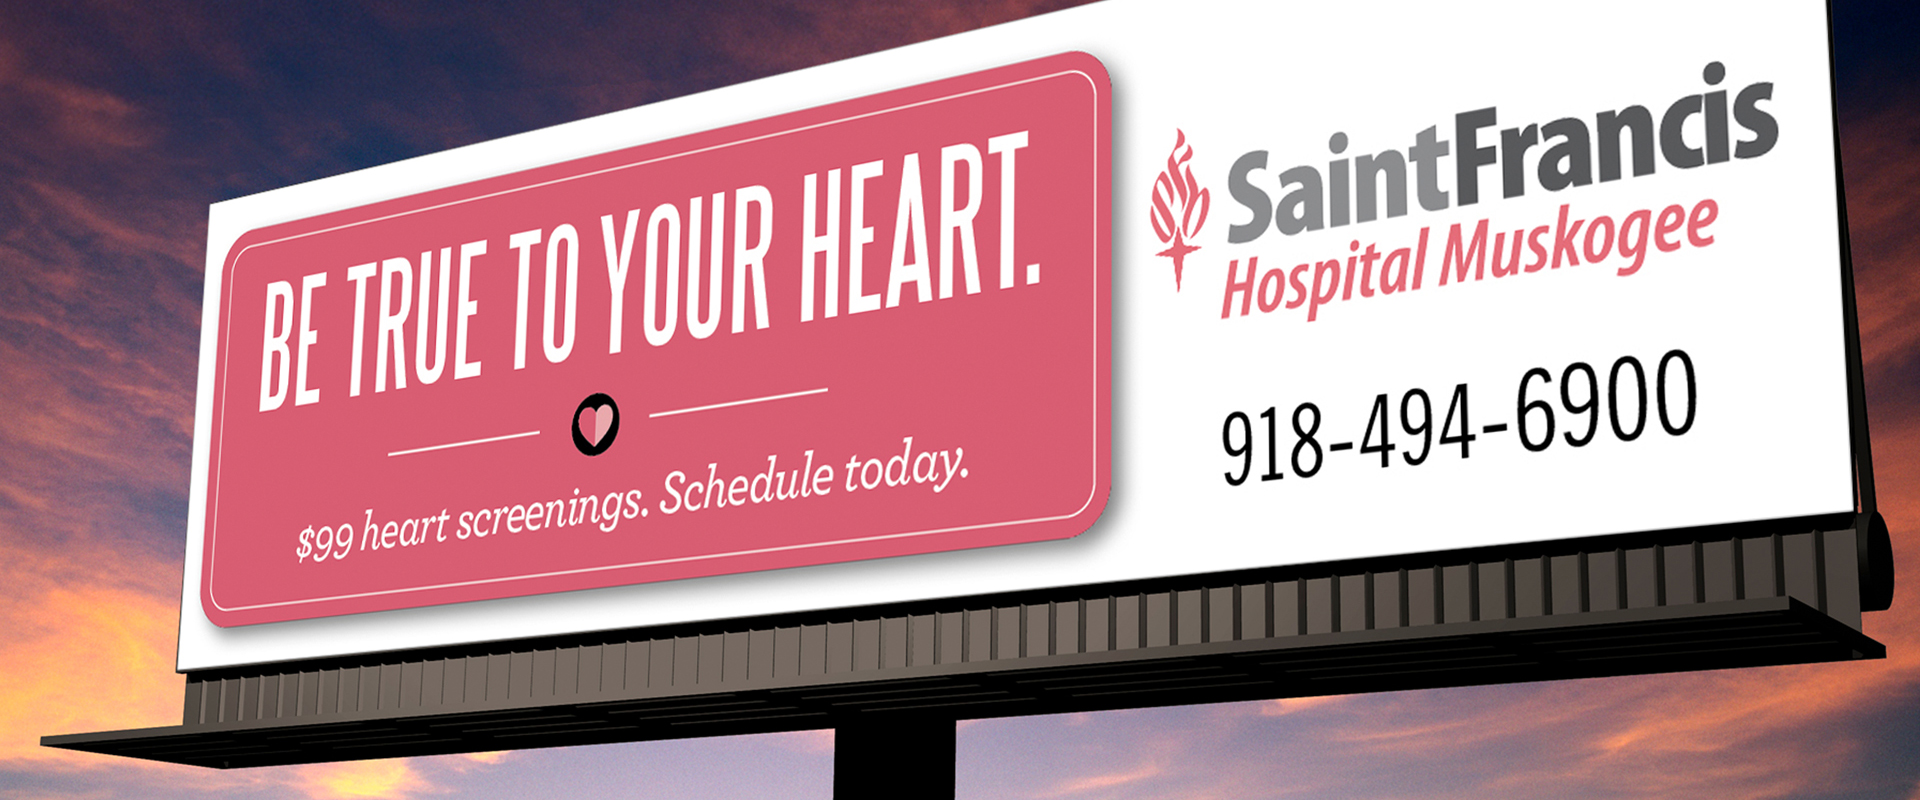 A billboard for Saint Francis Health System designed by AcrobatAnt.